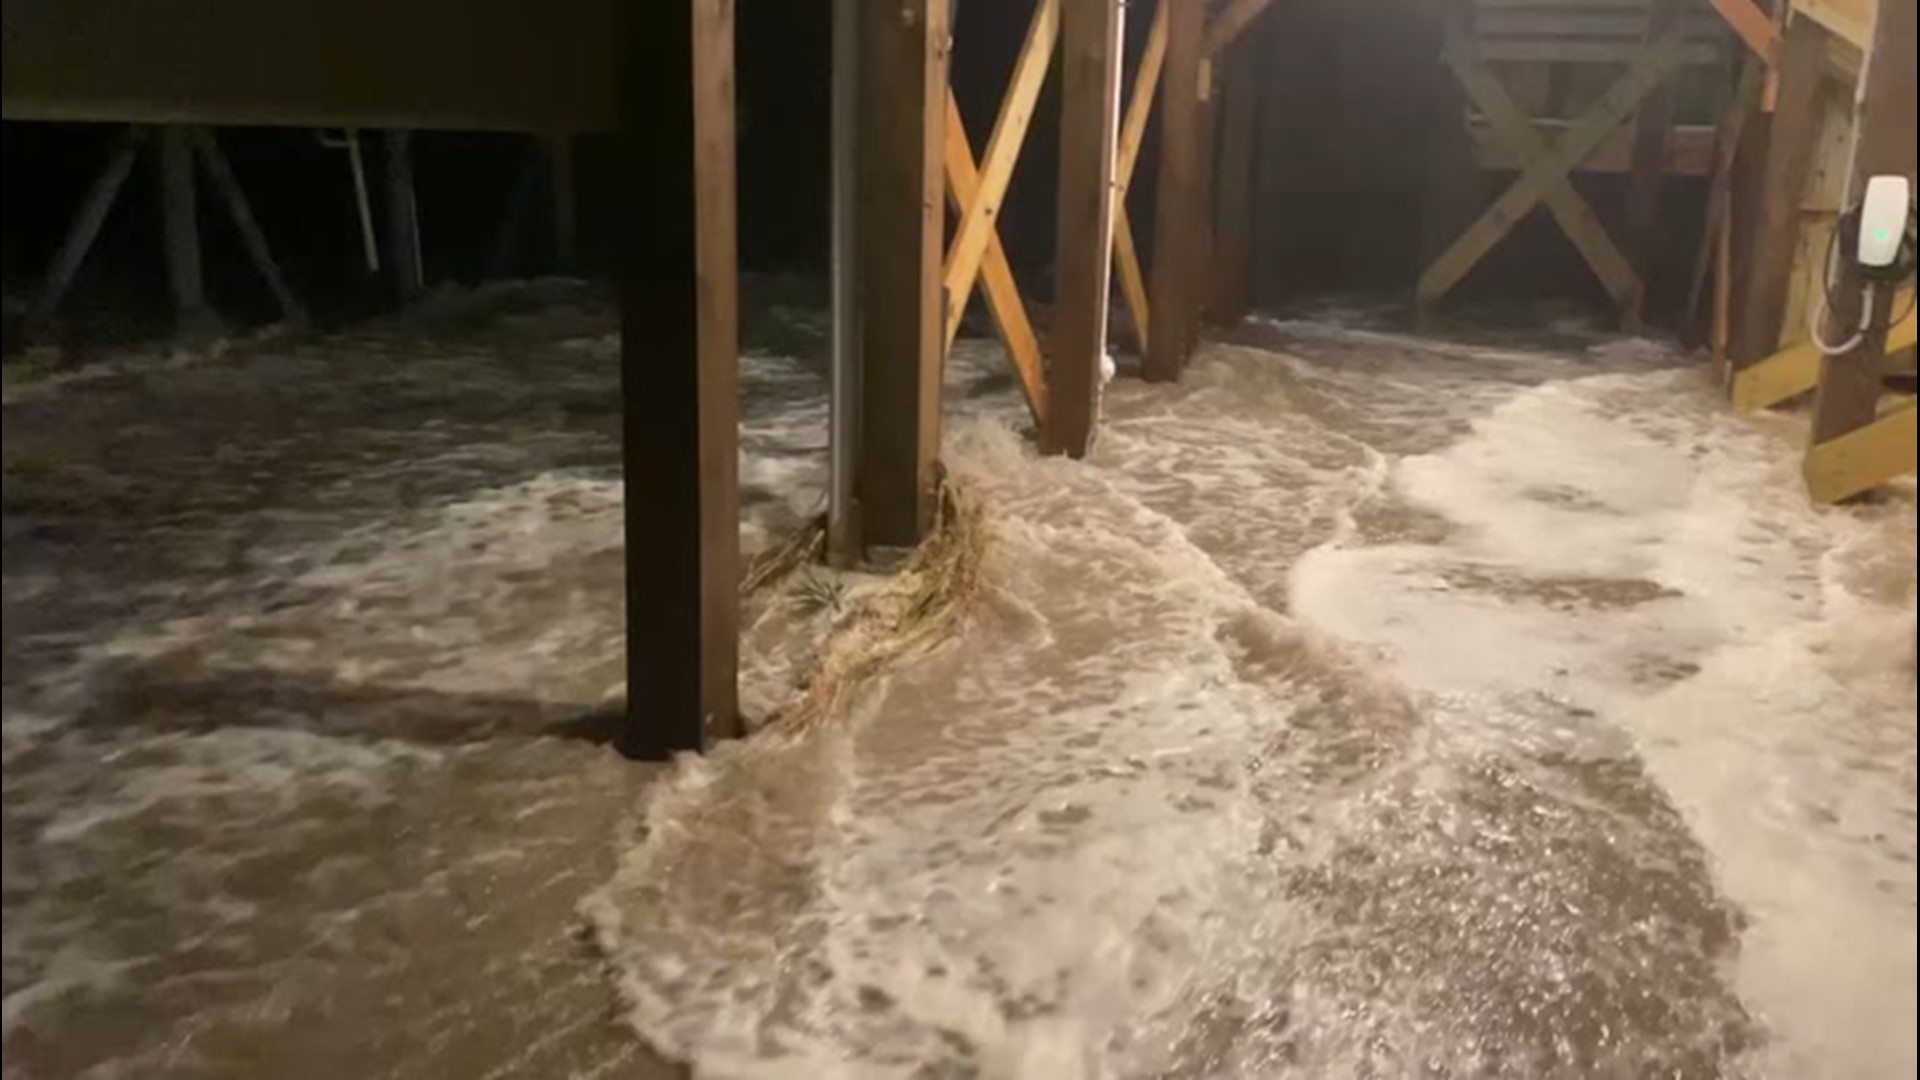 As Isaias lashed the North Carolina coast on Aug. 4, Chris Belliveau's home and truck in Oak Island were flooded by storm surge.